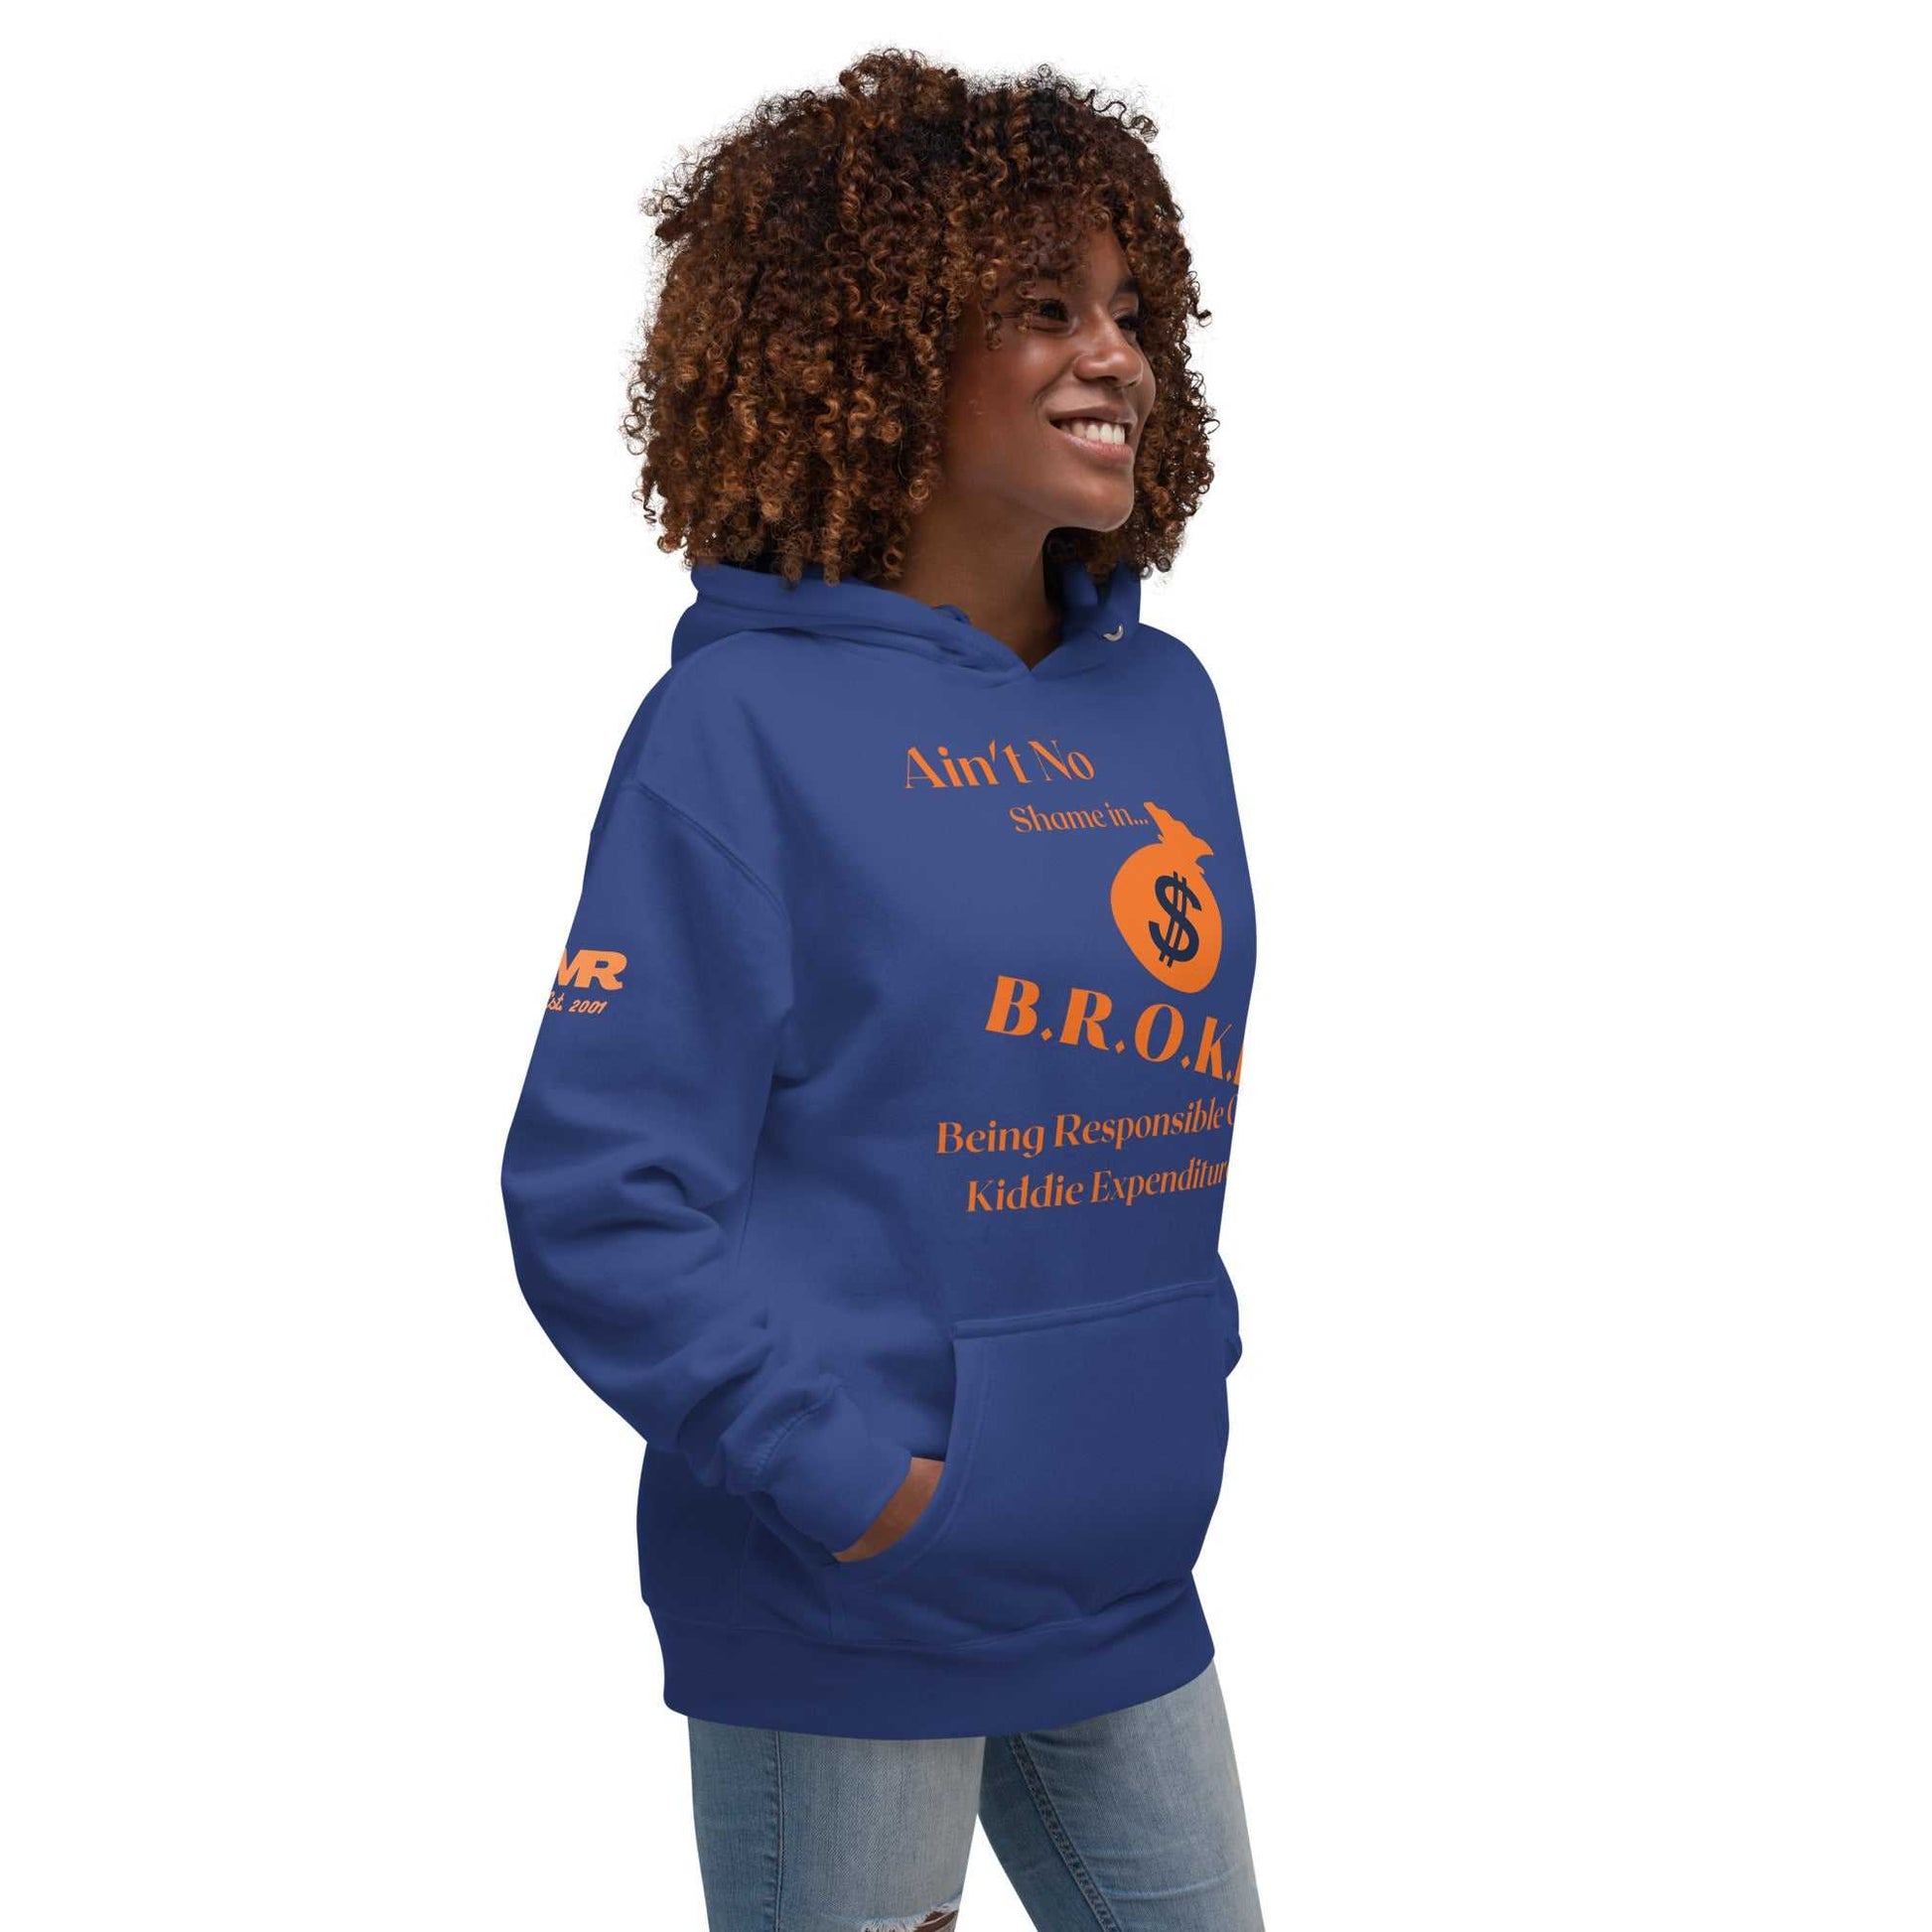 JMR Broke Special Edition Royal Blue/Orange Hoodie The JMR Collection Hoodie Good Vibes Daily Lab 54